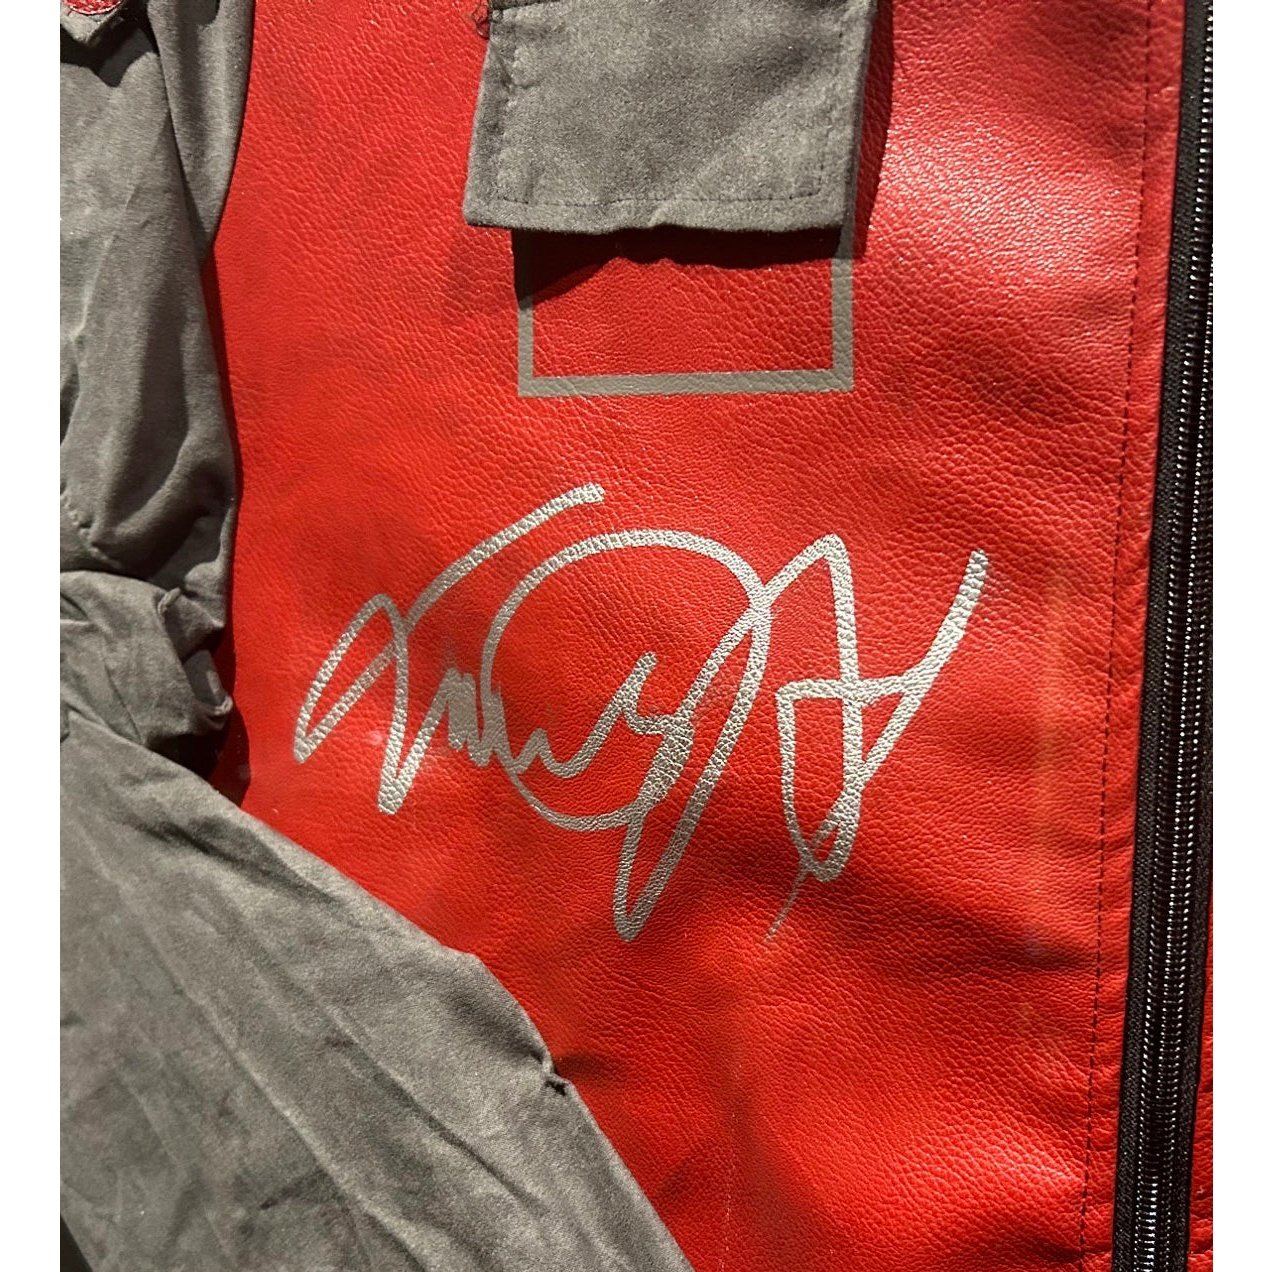 Michael J Fox Framed Signed Jacket Beckett Autographed Back to the Future II